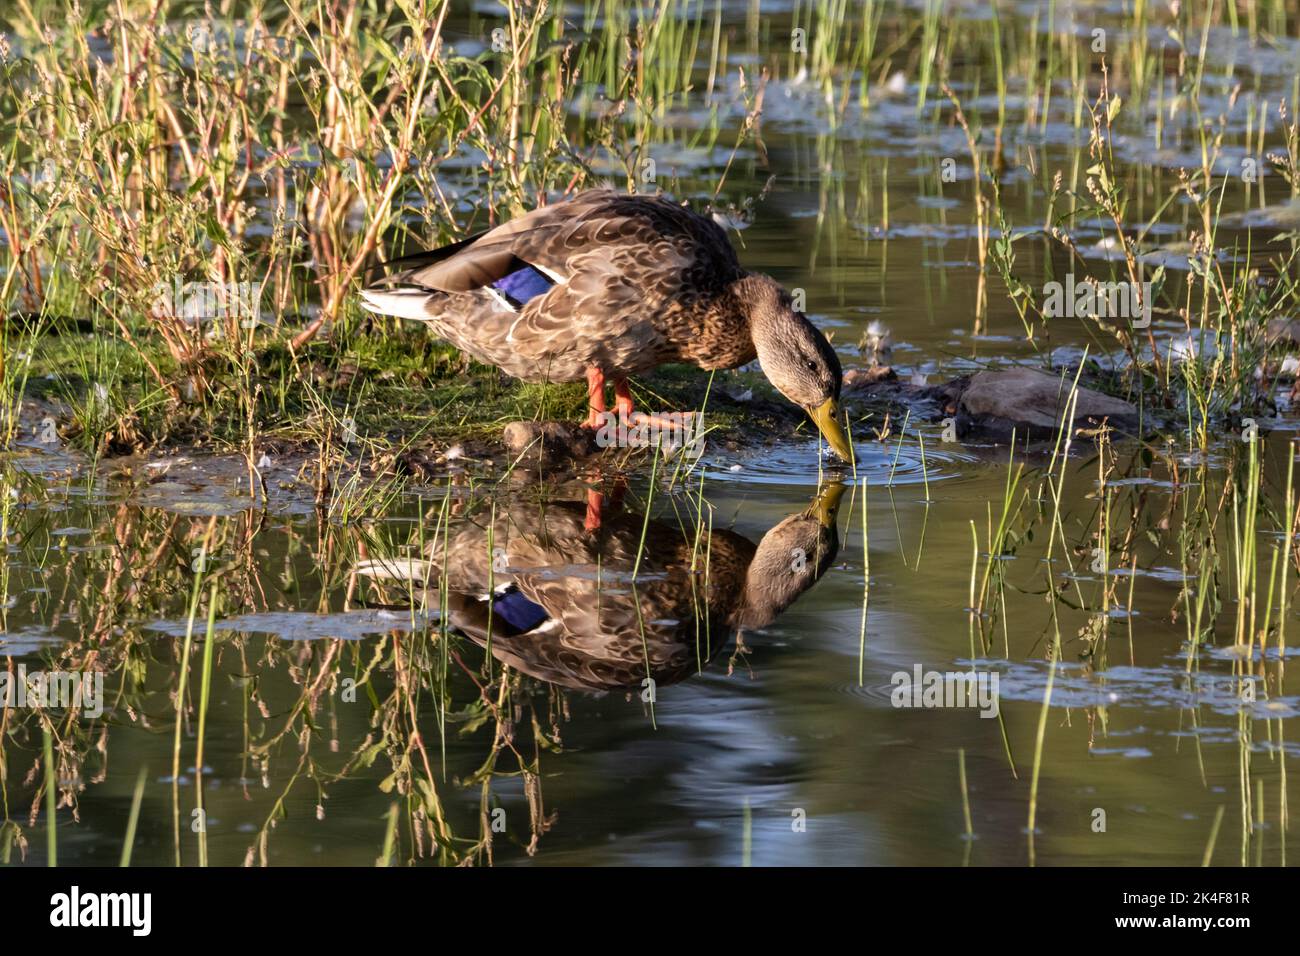 Mallard duck (Anas platyrhynchos) at edge of a lake standing among the reeds. Reflection in water. Stock Photo